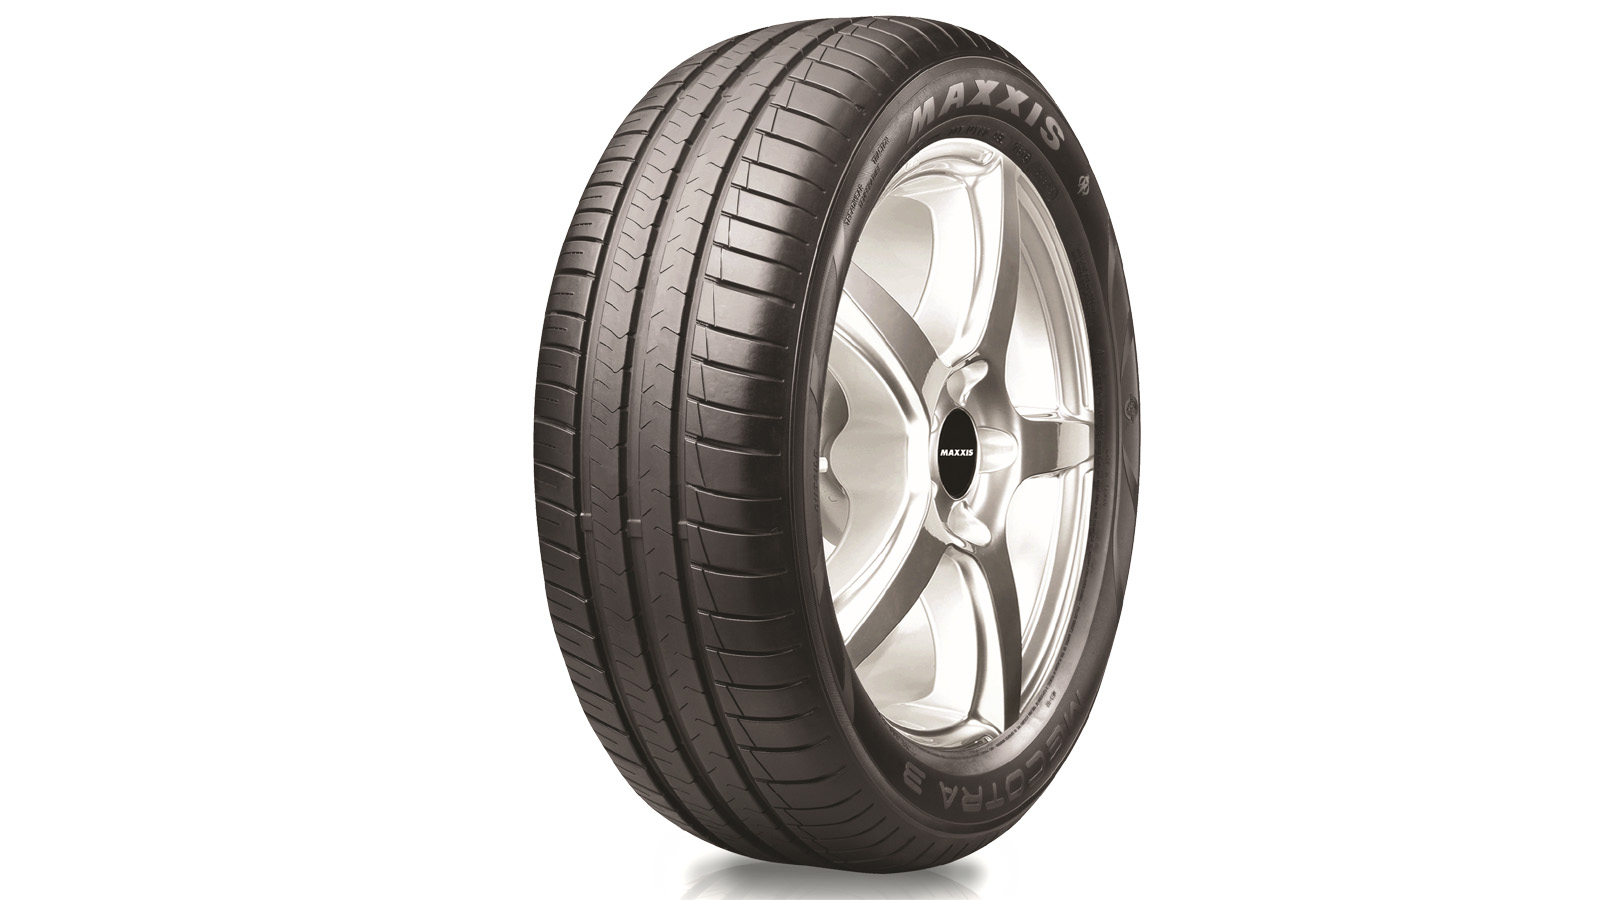 Maxxis отзывы лето. Maxxis Mecotra 3. Максис шины лето. Автомобильная шина Maxxis Mecotra me3 185/70 r14 88h летняя. Maxxis 265/50r20 112v s-Pro (XL).